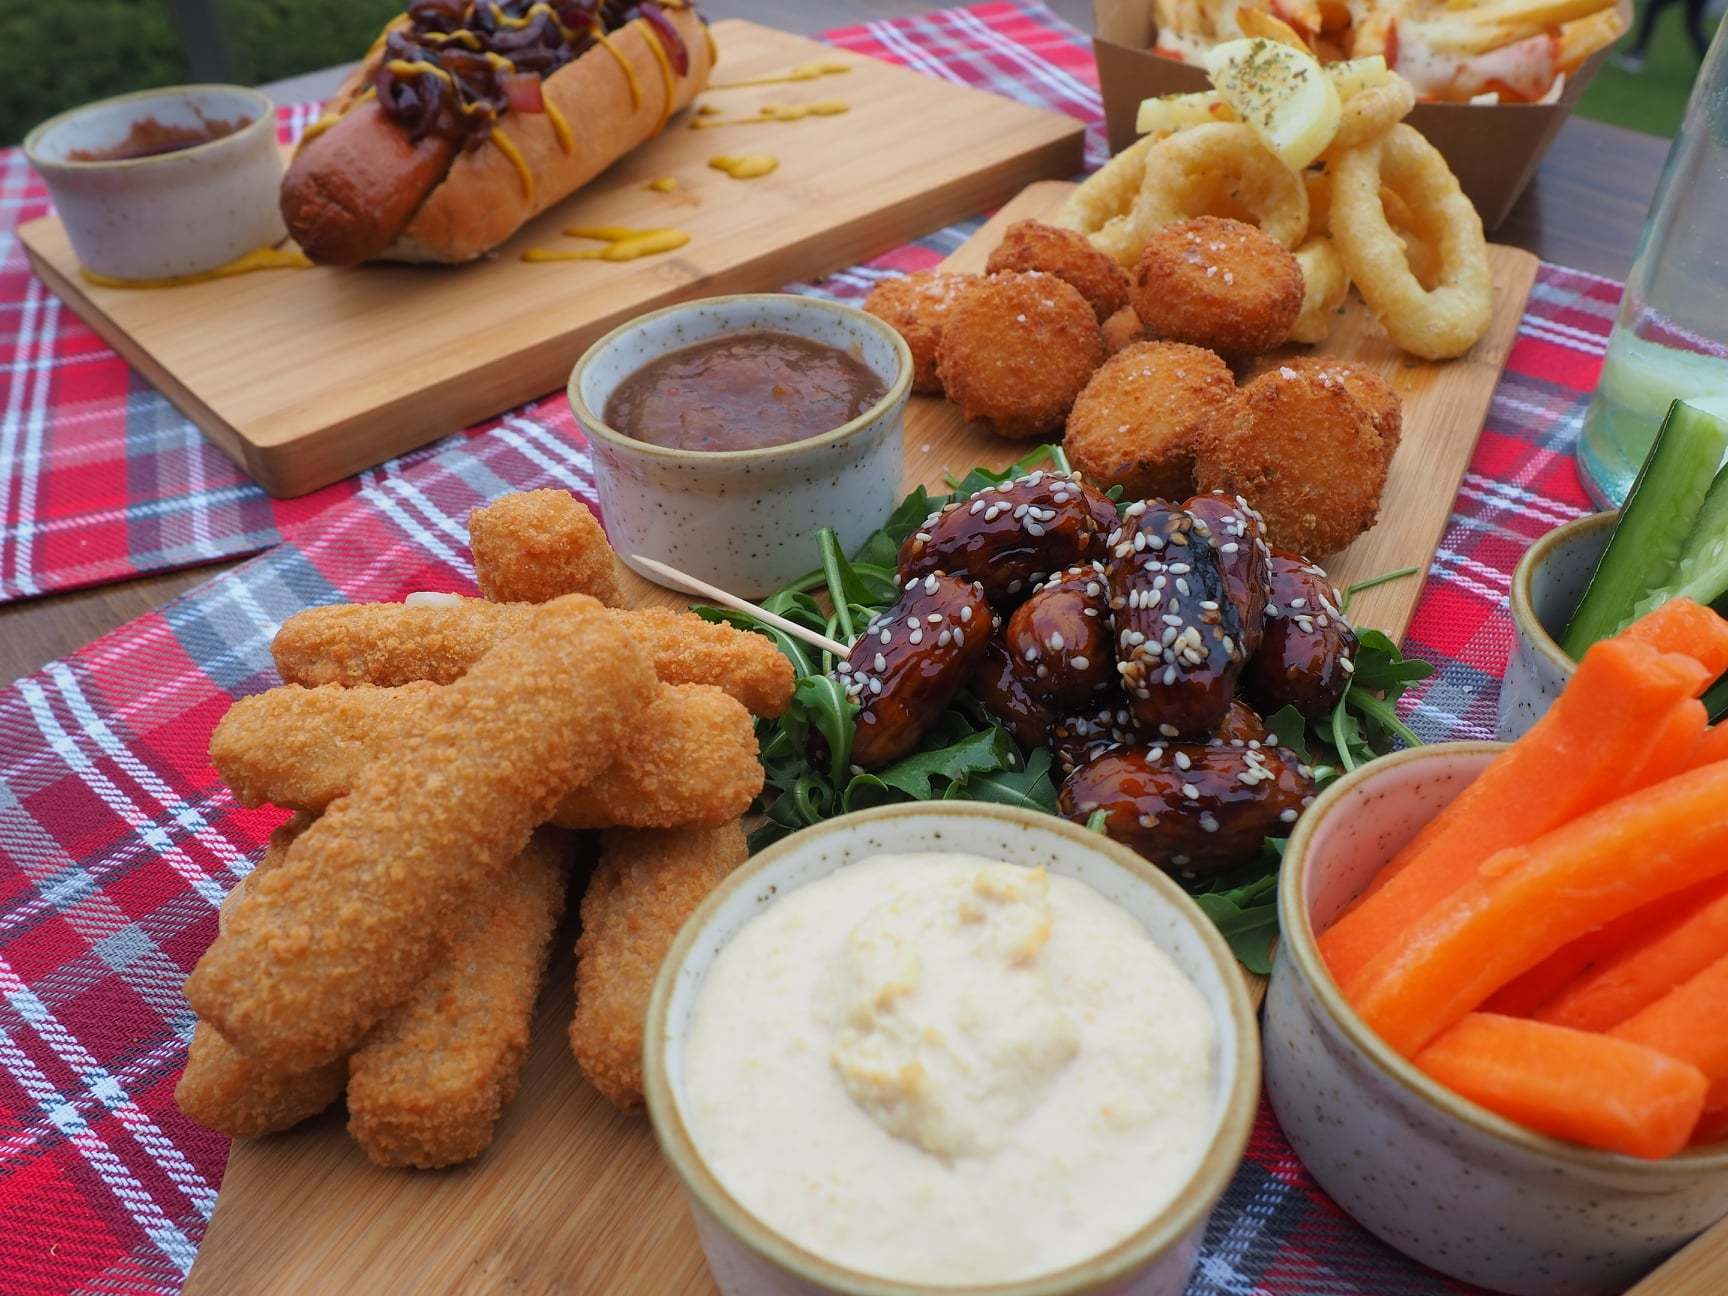 The Picnic in the Park range includes sticky cocktail sausages and bruschetta